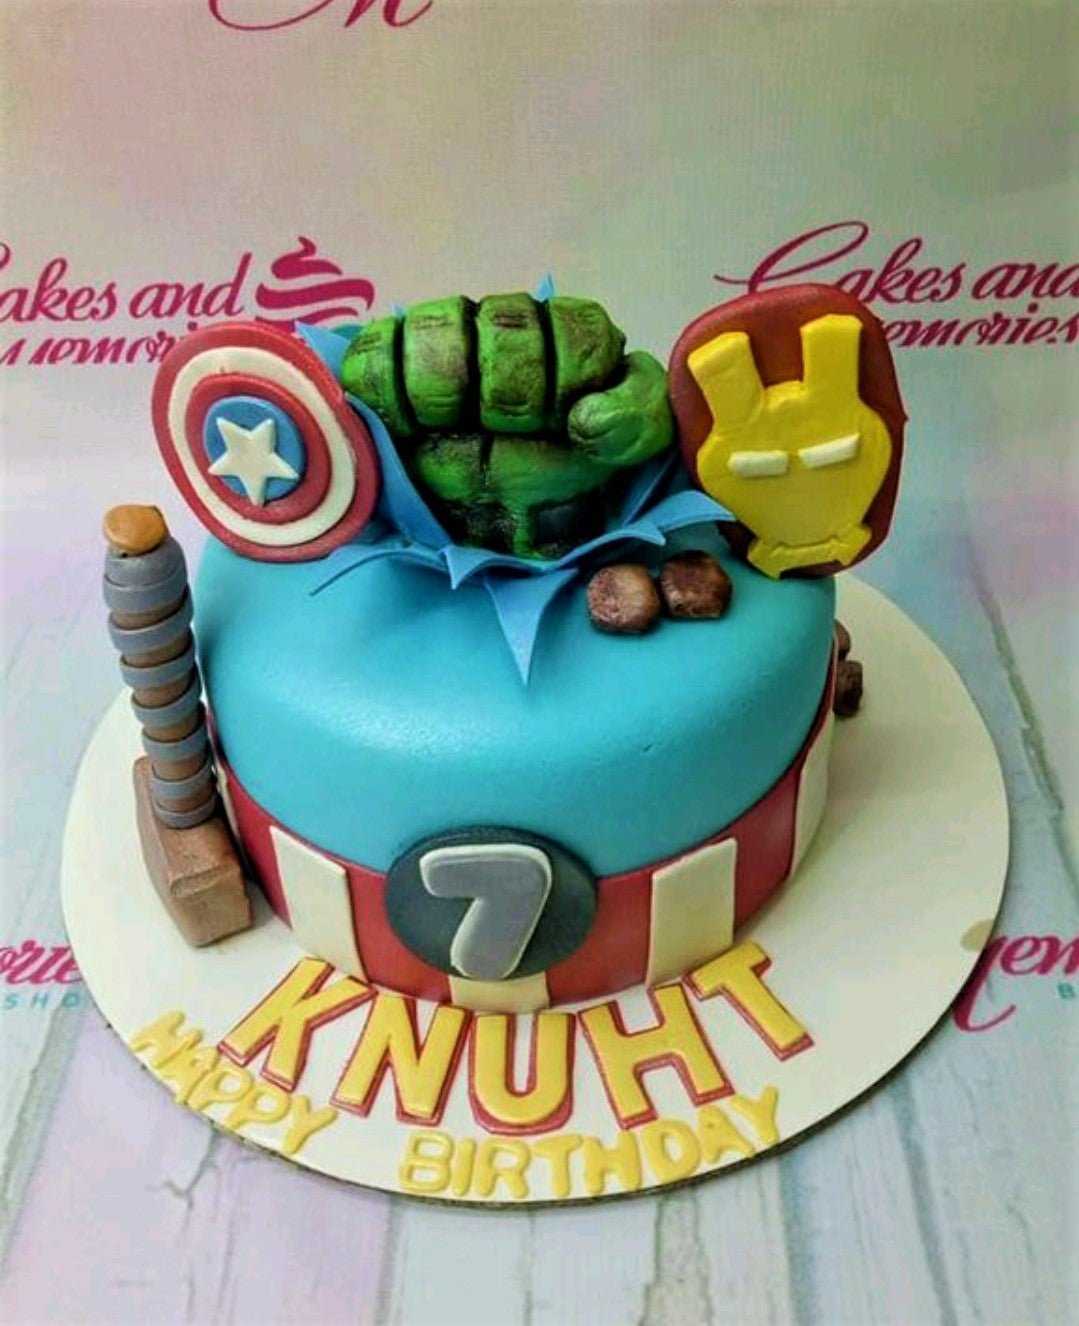 Avengers Cake - 1103 – Cakes and Memories Bakeshop